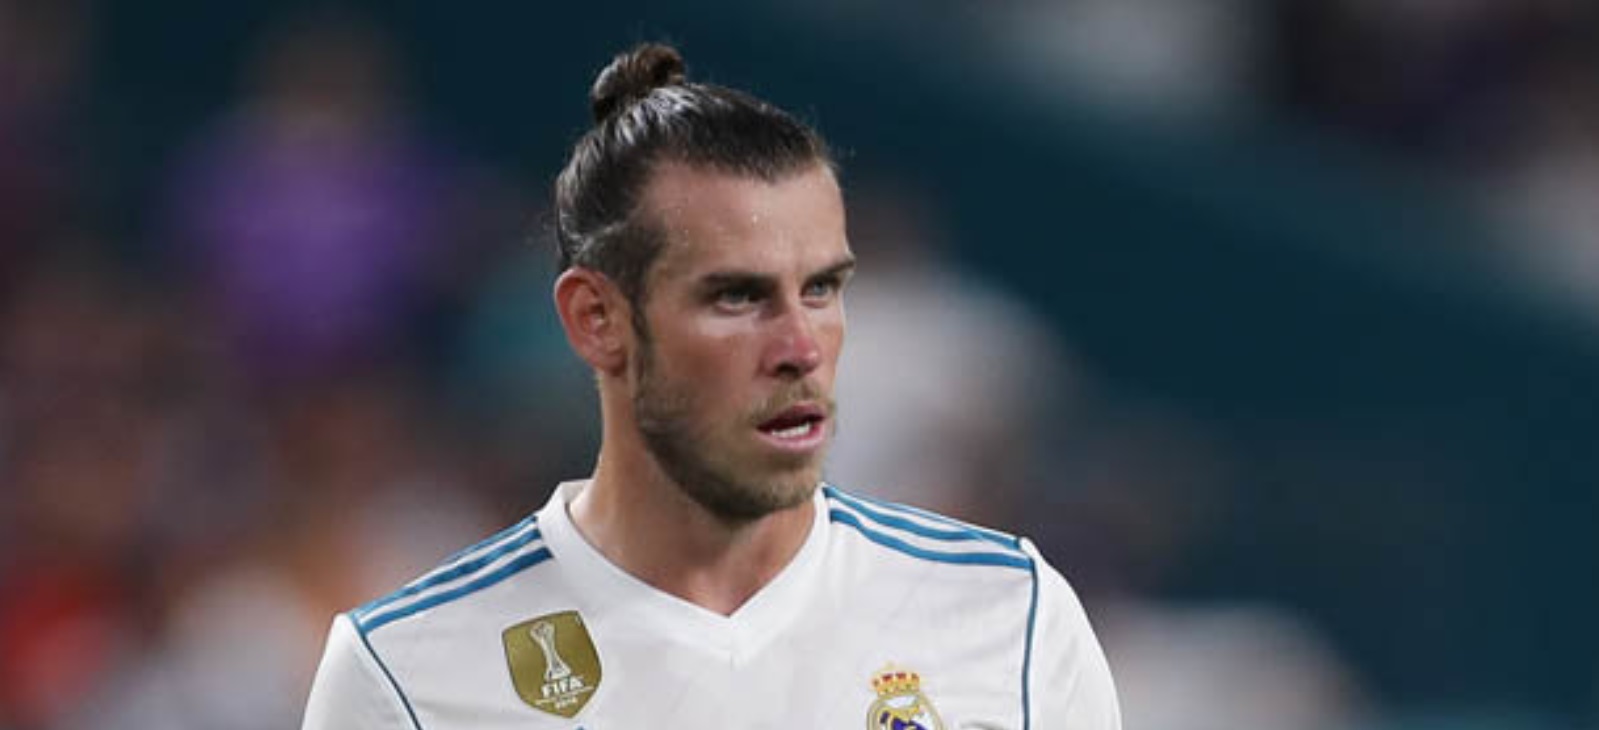 Bale 2017 contract with club